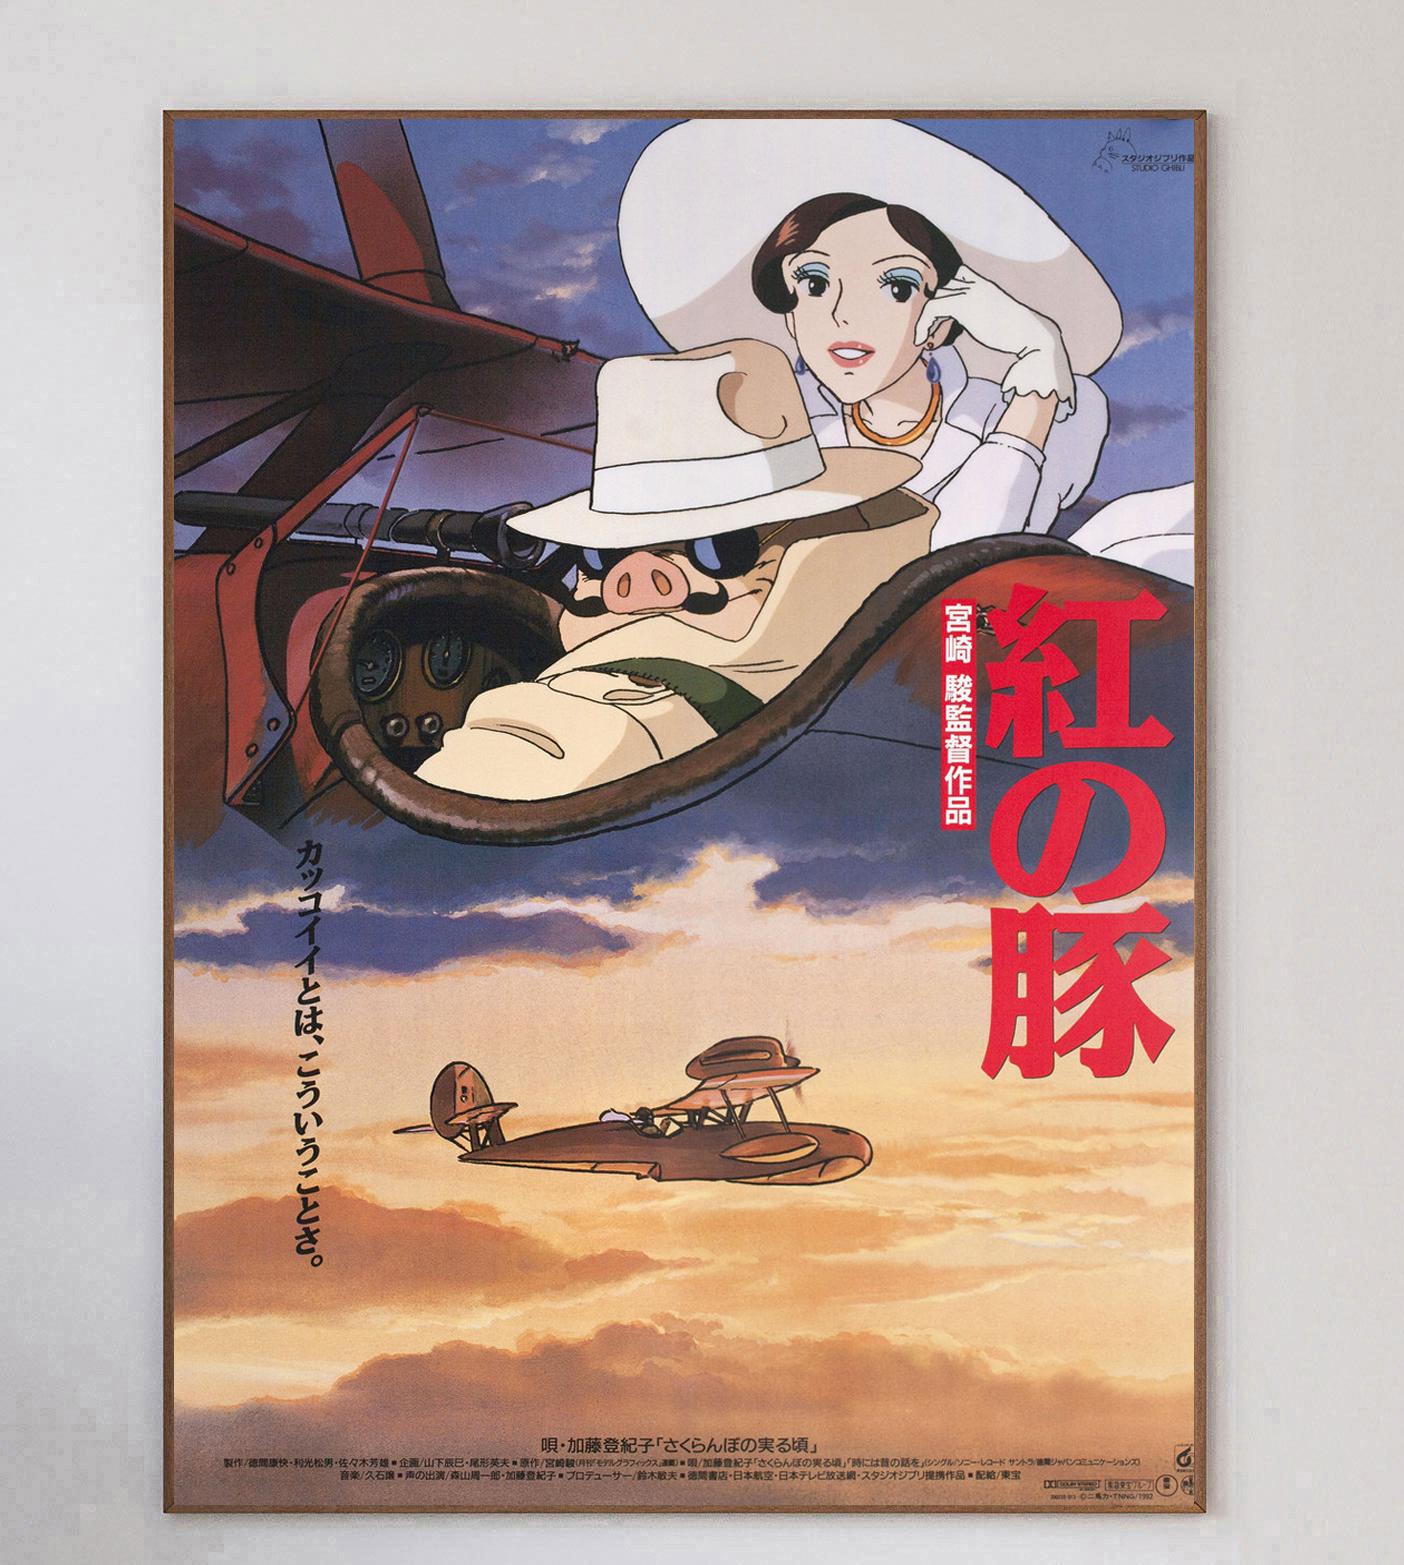 Written and directed by anime and animation legend Hayao Miyazaki, and based on his 1989 manga, 